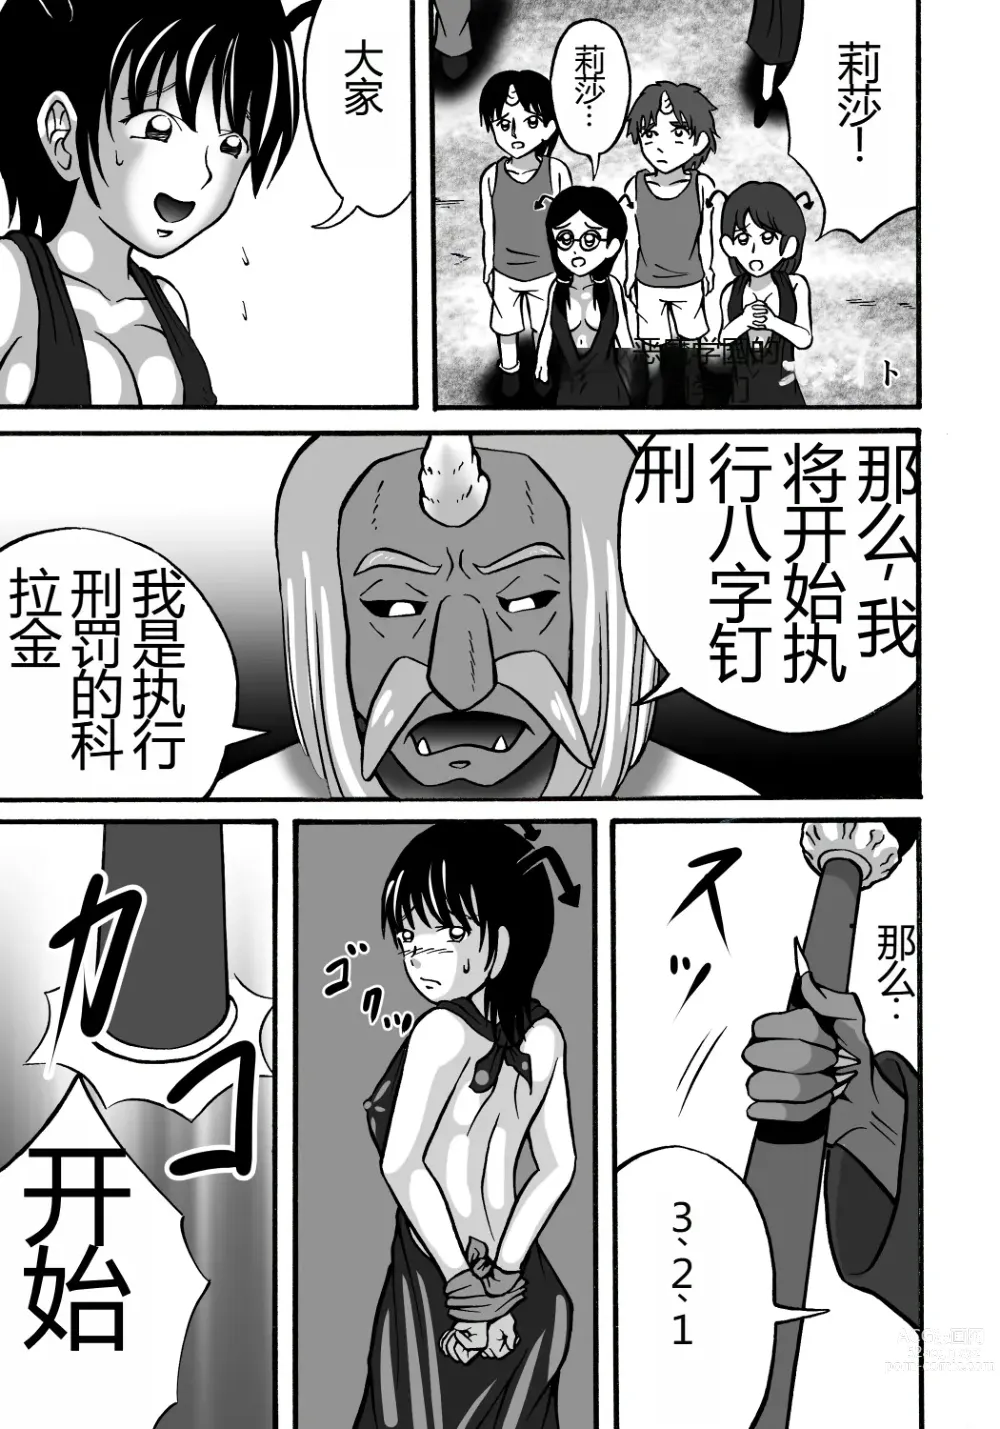 Page 9 of doujinshi 羞耻之刑罚